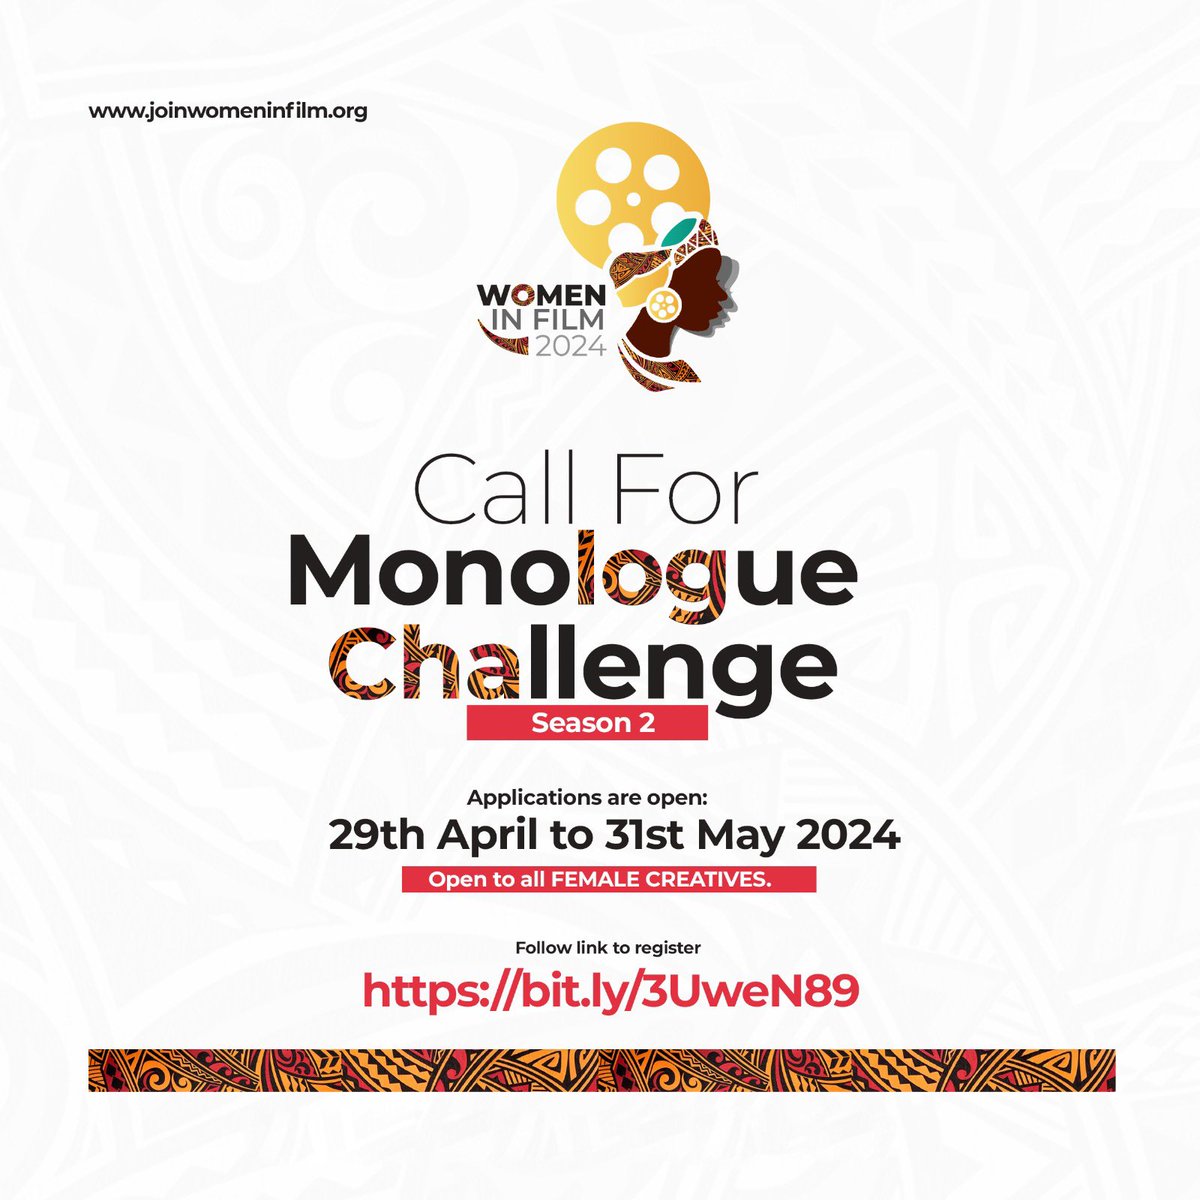 Dear ladies , have you applied yet , 
You could be the next winner of the Women In Film Monologue challenge 2024 . 
Follow the link shared on the poster and send your monologue before 31st - May 2024. 

#WomenInFilm